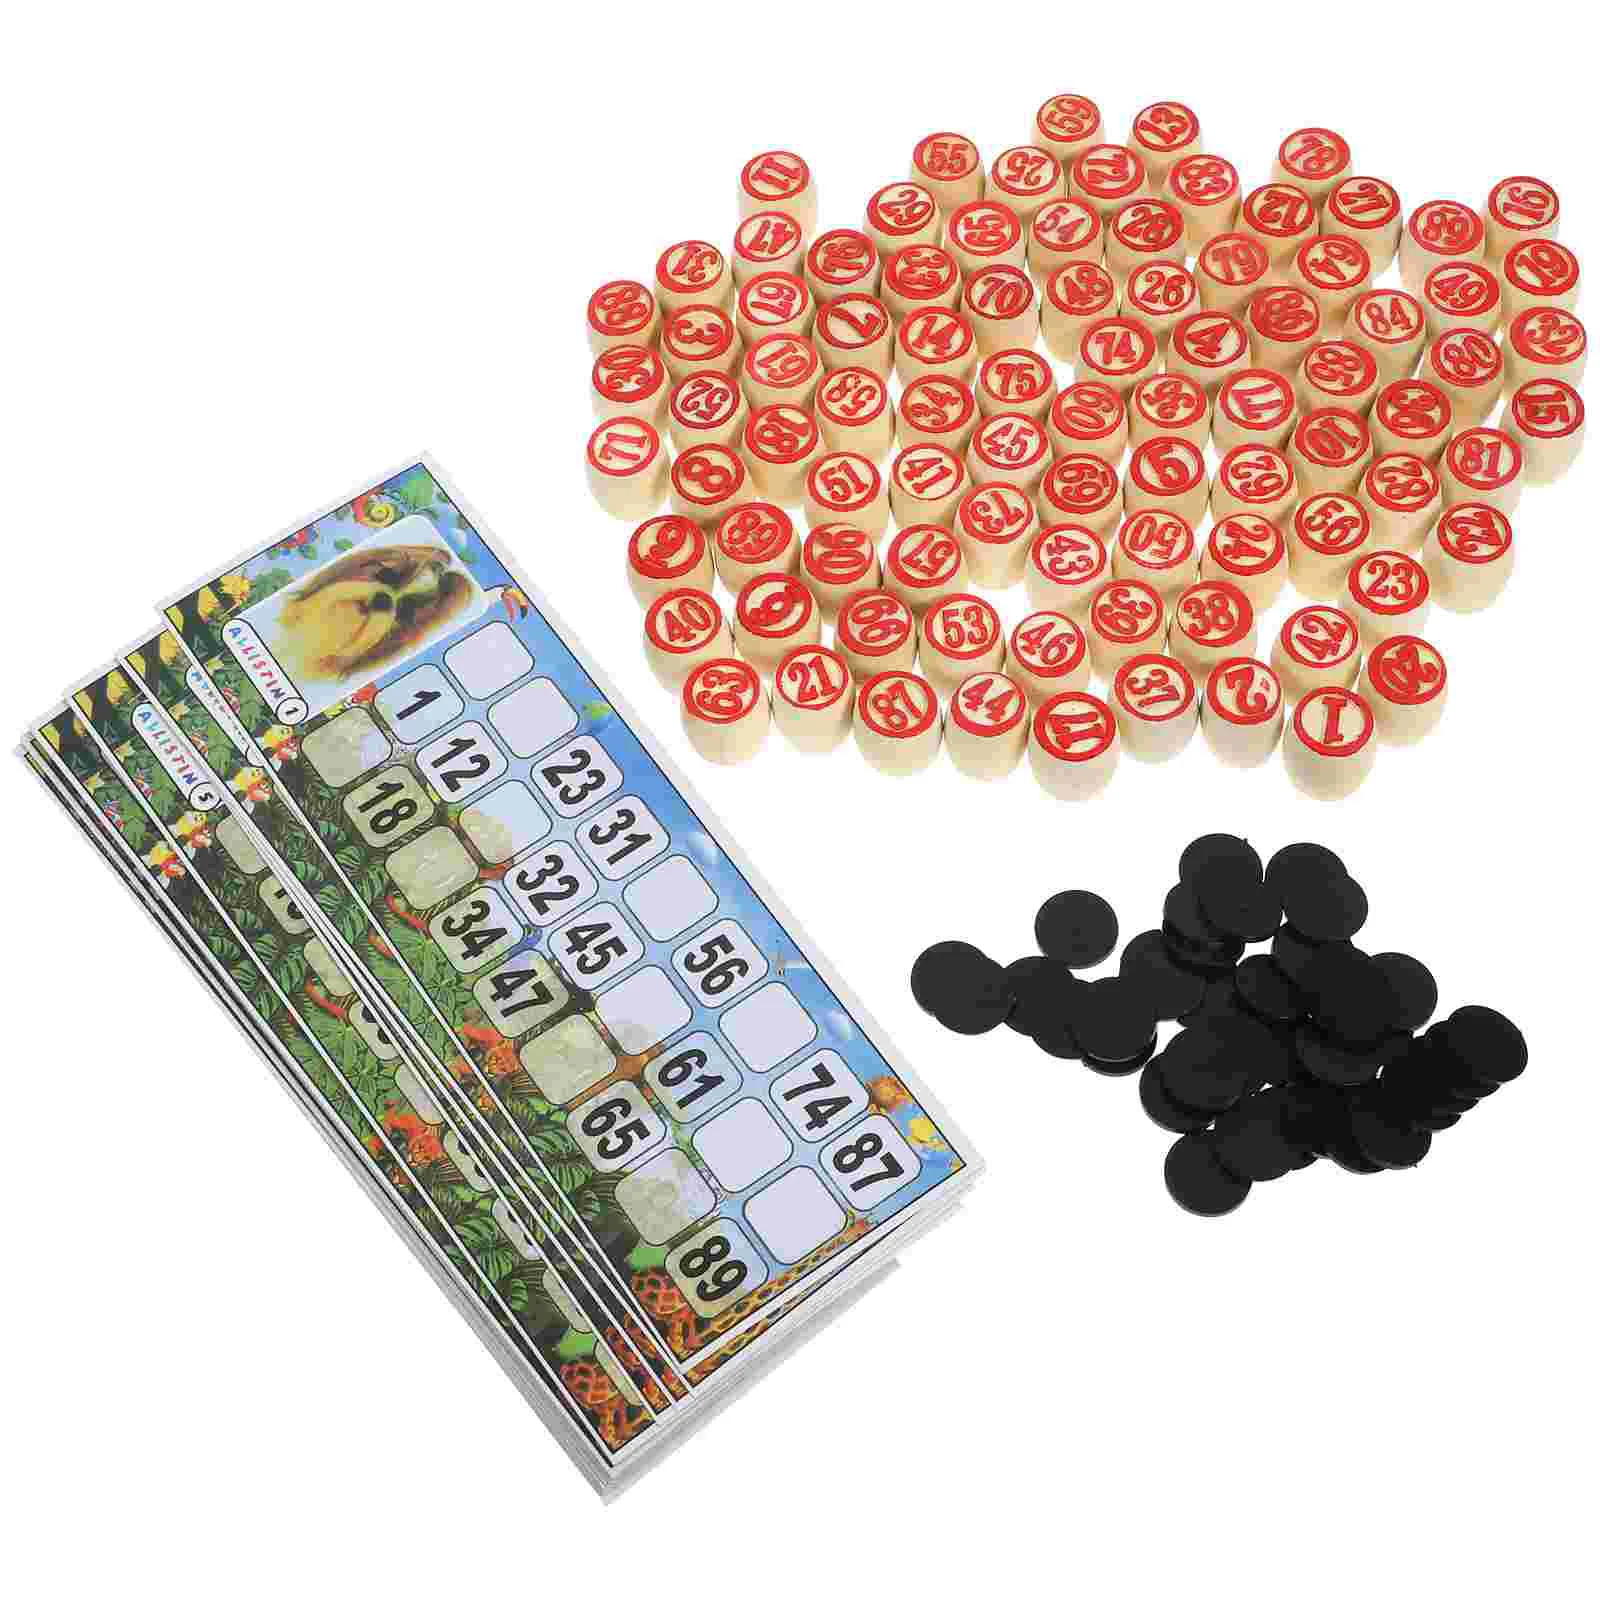 1 Set Russian Lotto Set Family Game Wood Russian Lotto Game for Adults Russian Lotto Game Supplies